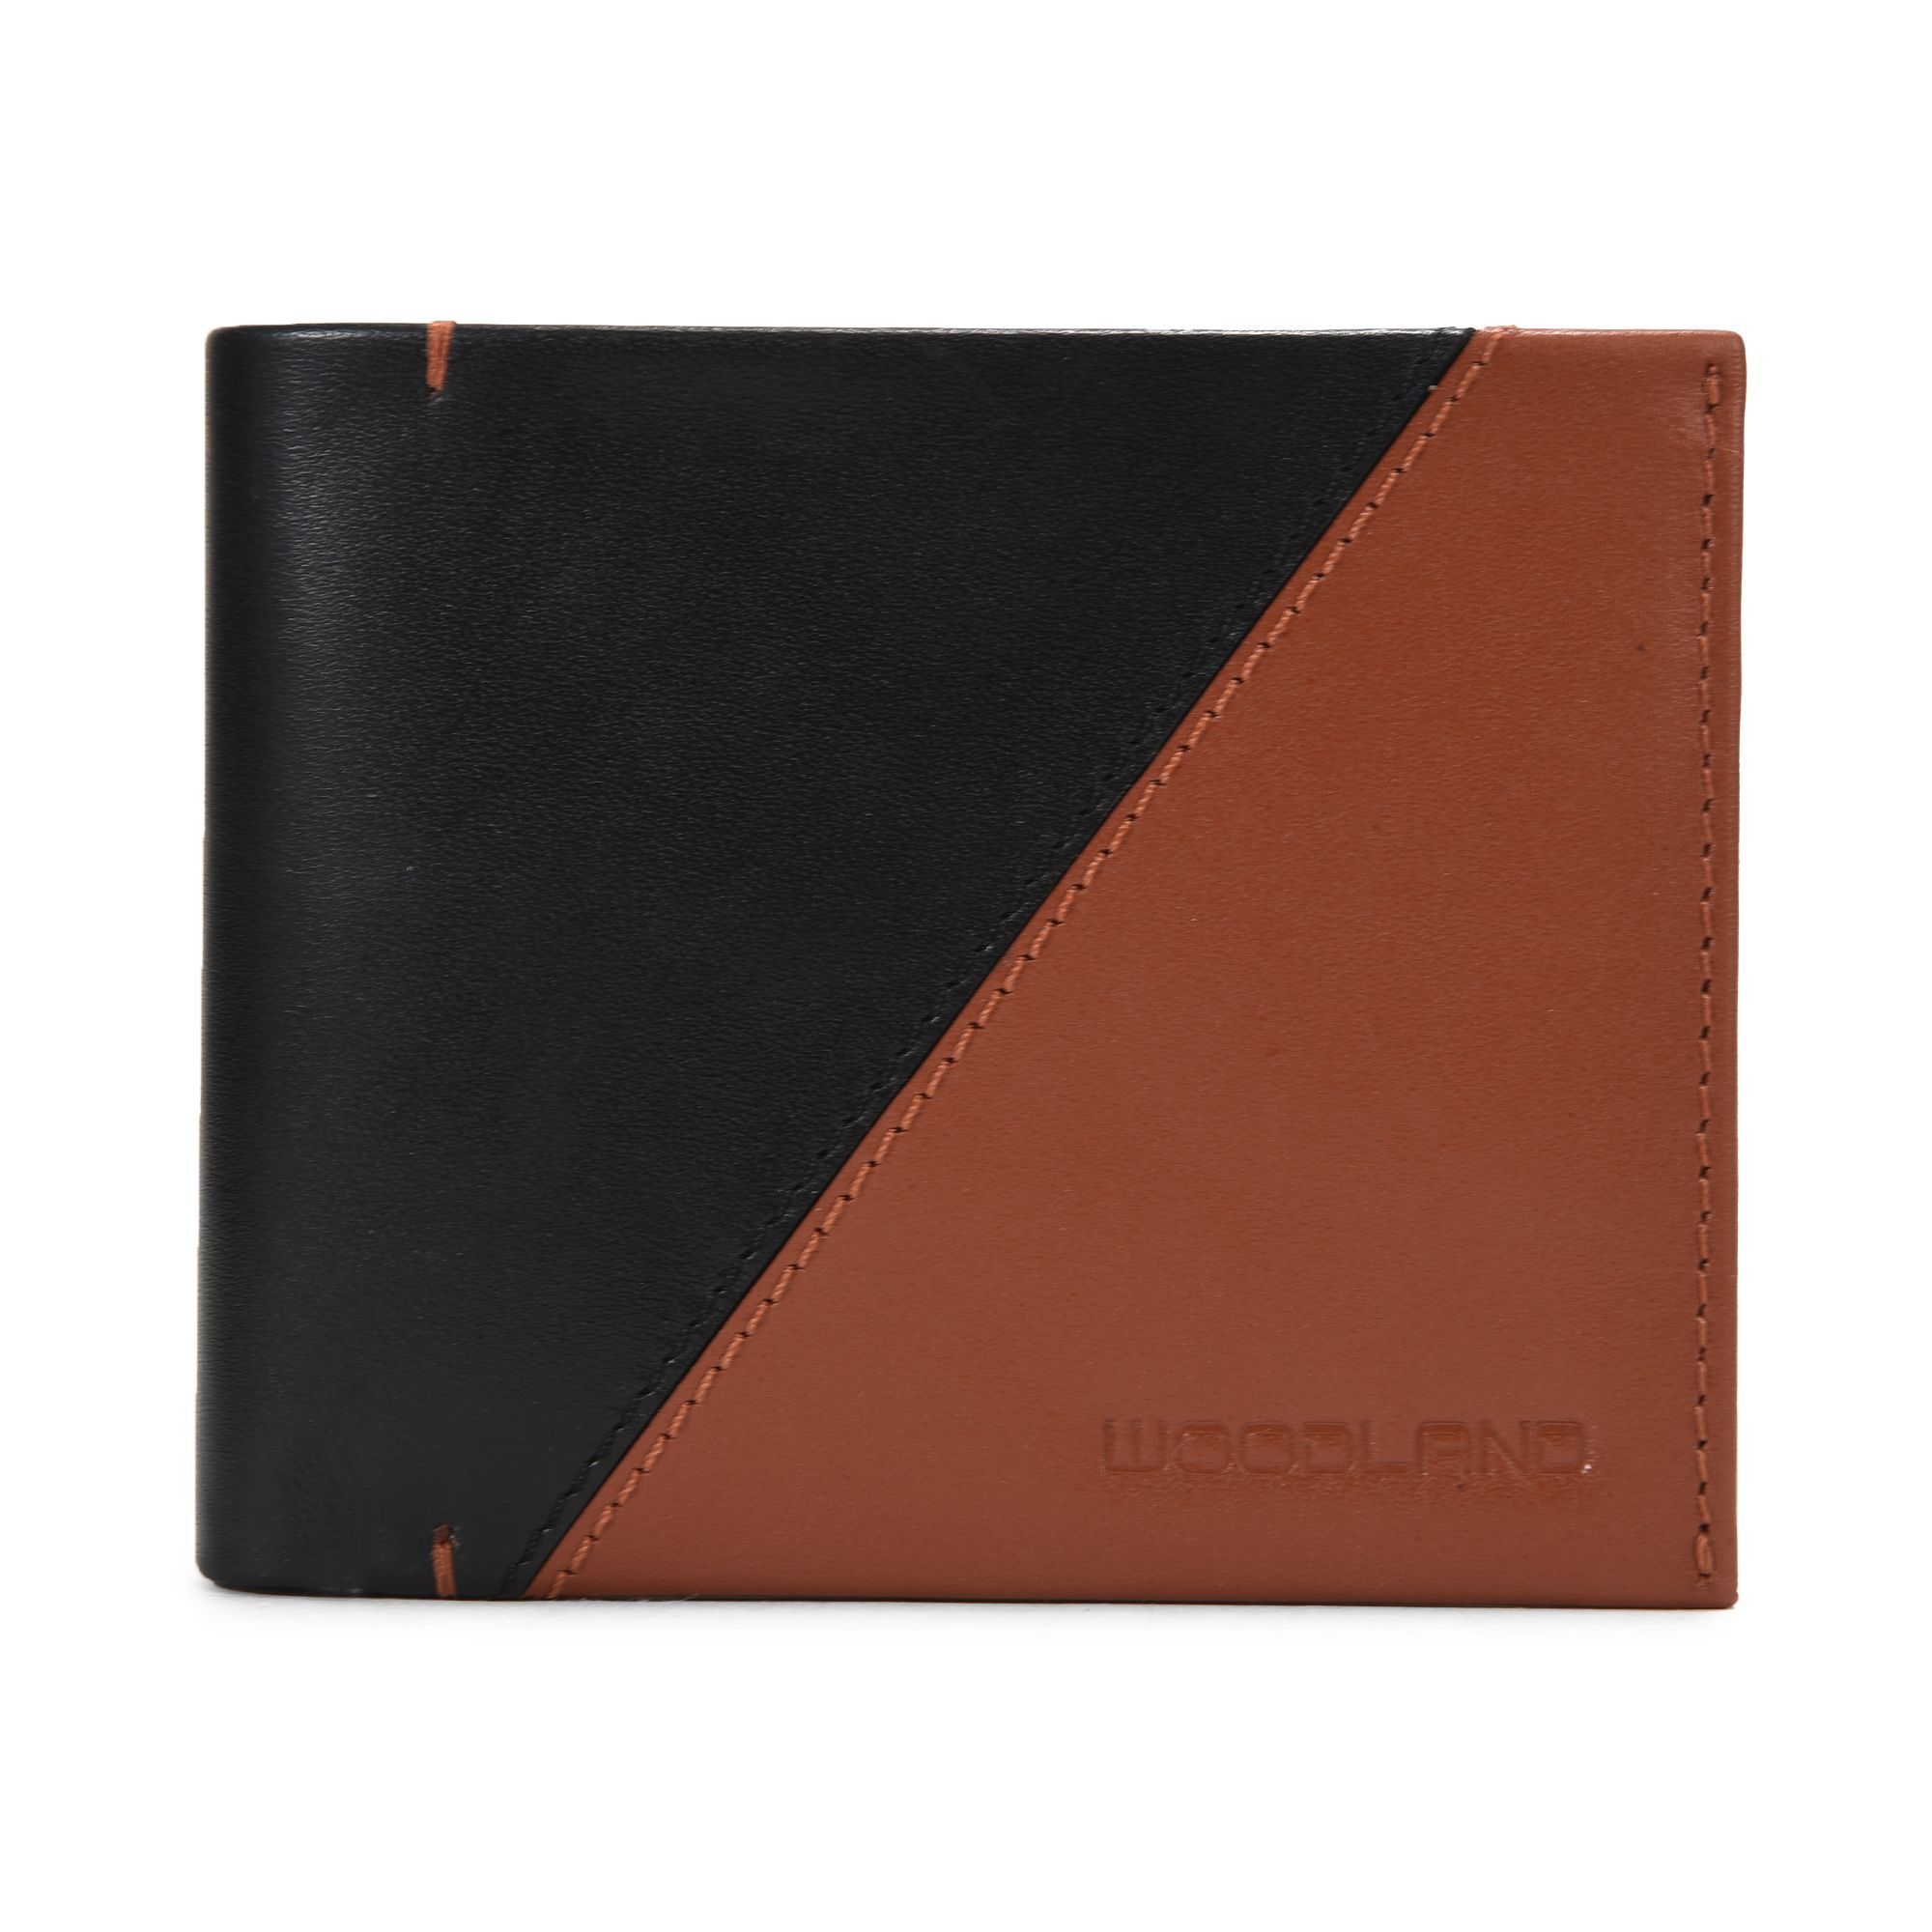 WOODLAND Men Casual Tan Genuine Leather Wallet - Price History